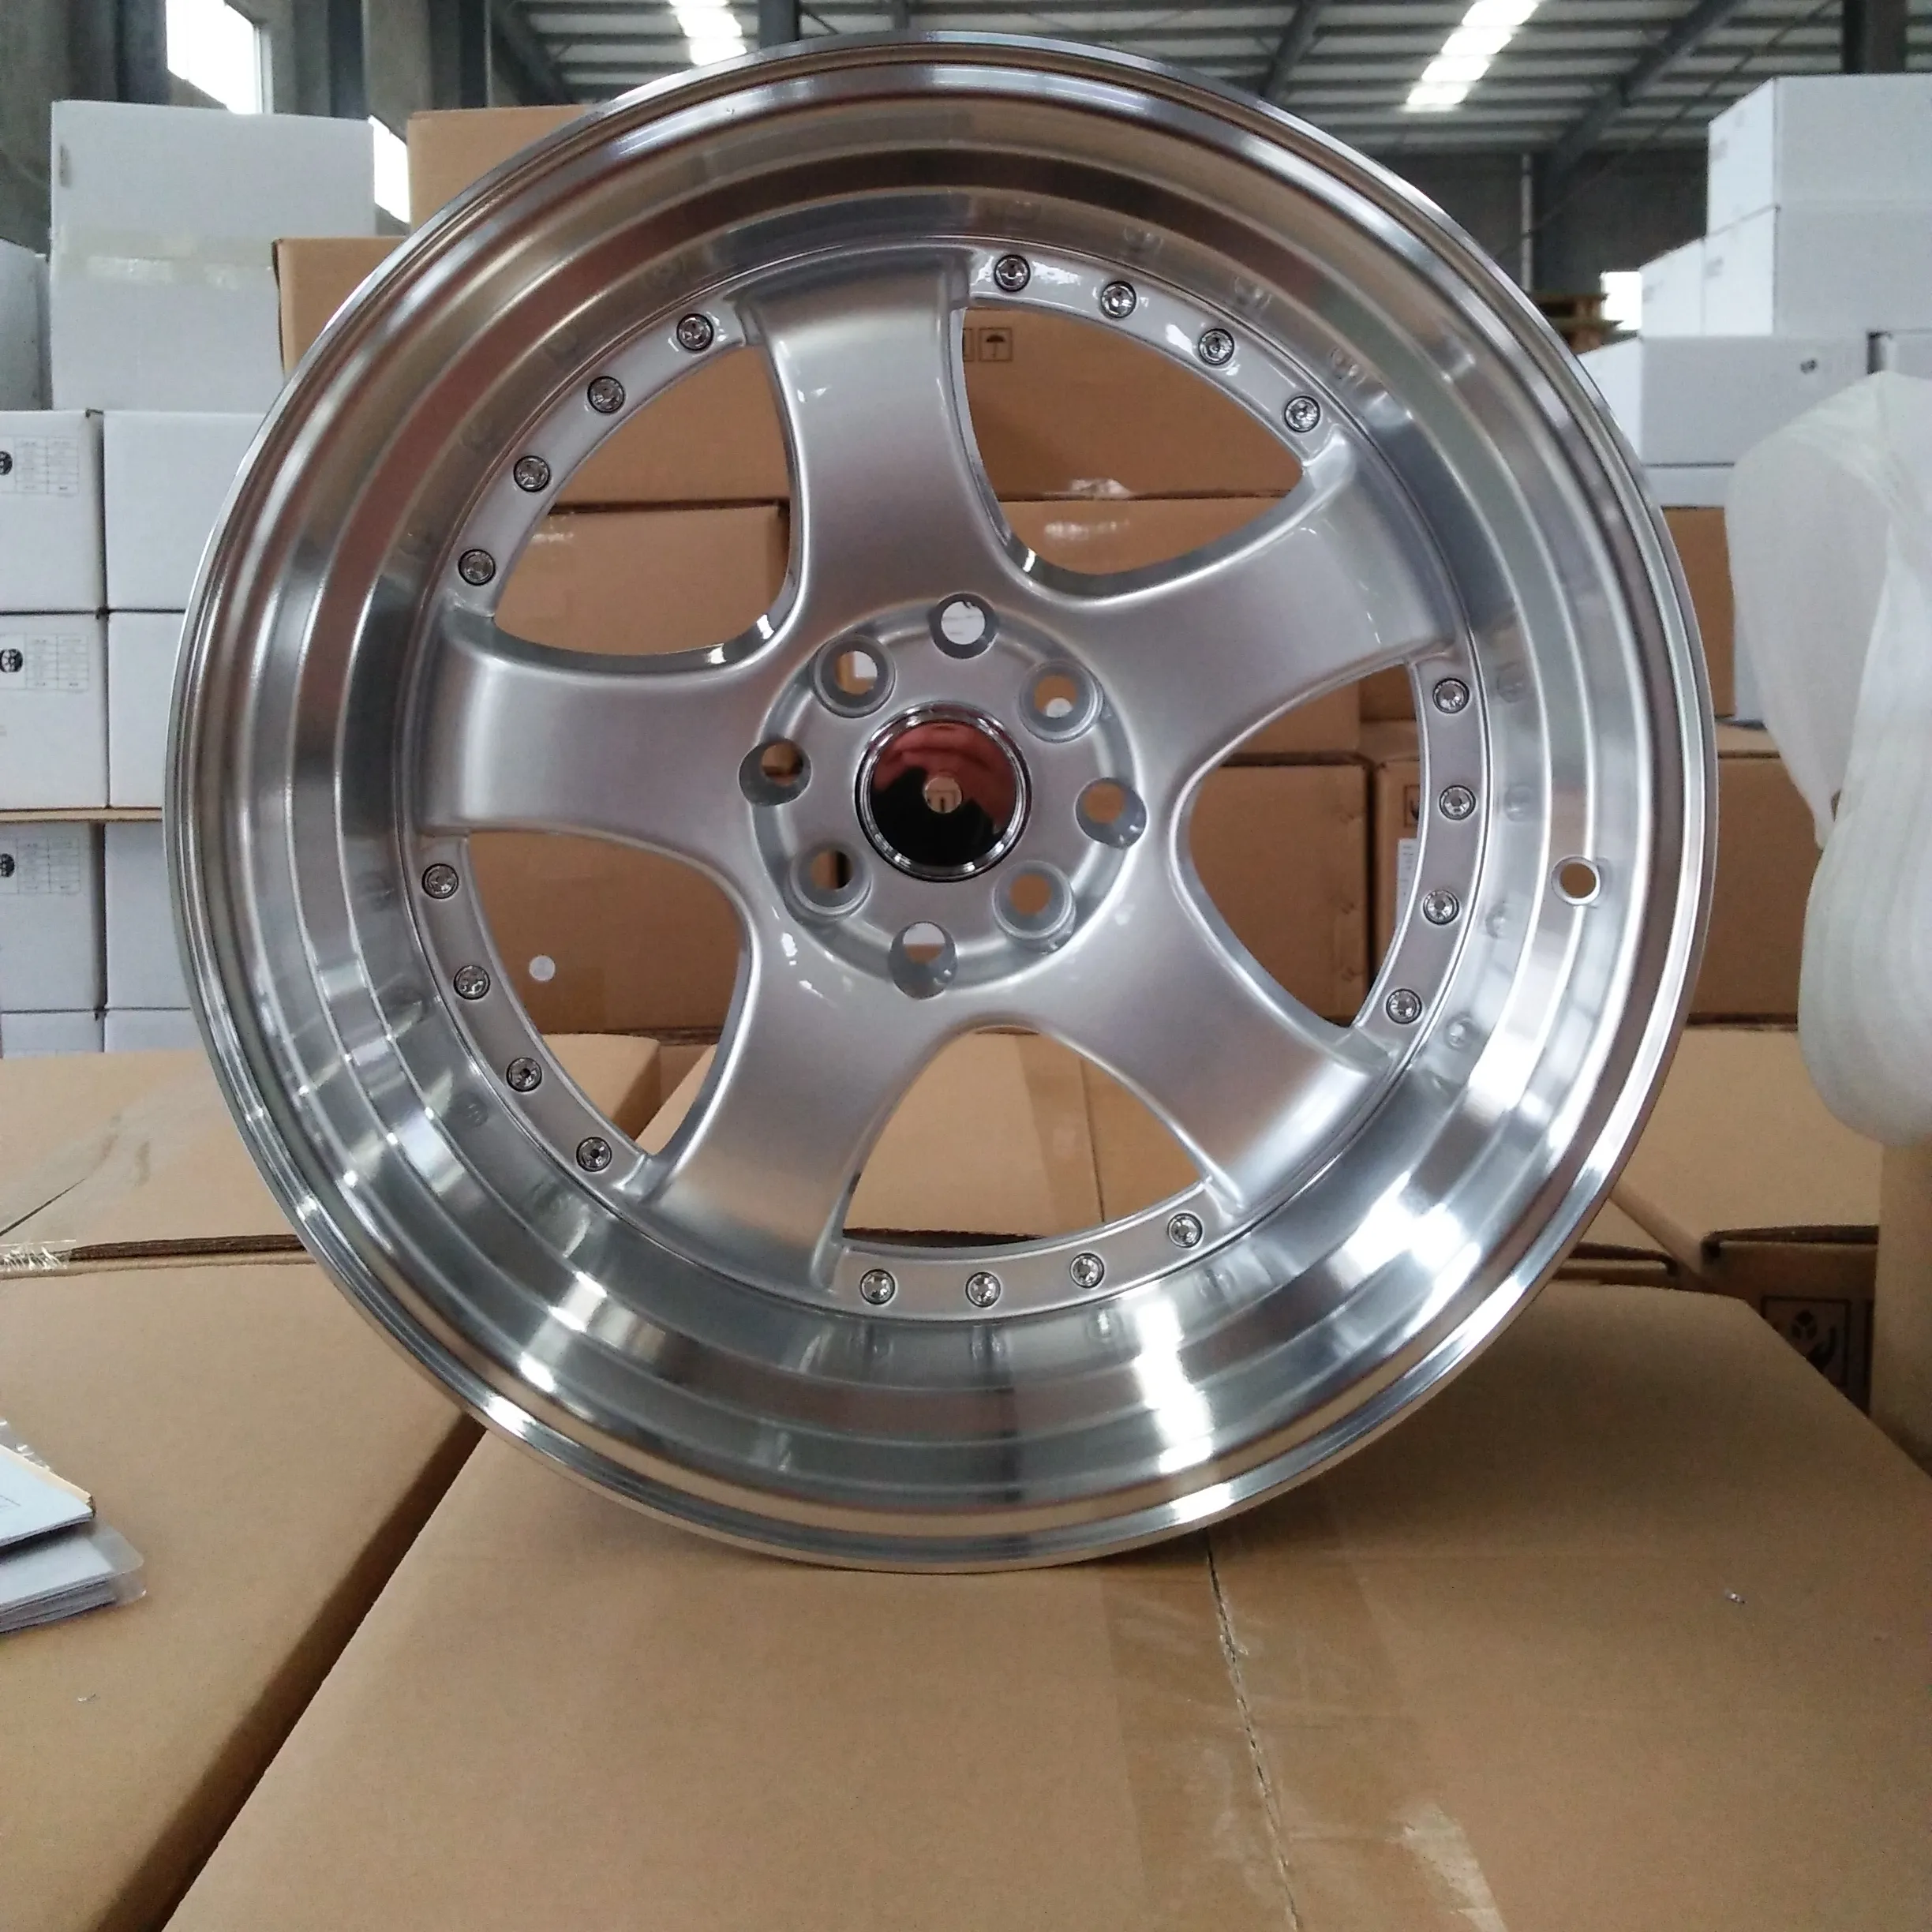 Flrocky Professional Manufacture Promotion Price 14X5.5 15 17 18 Inch Aluminum Alloy Casting Car Wheels